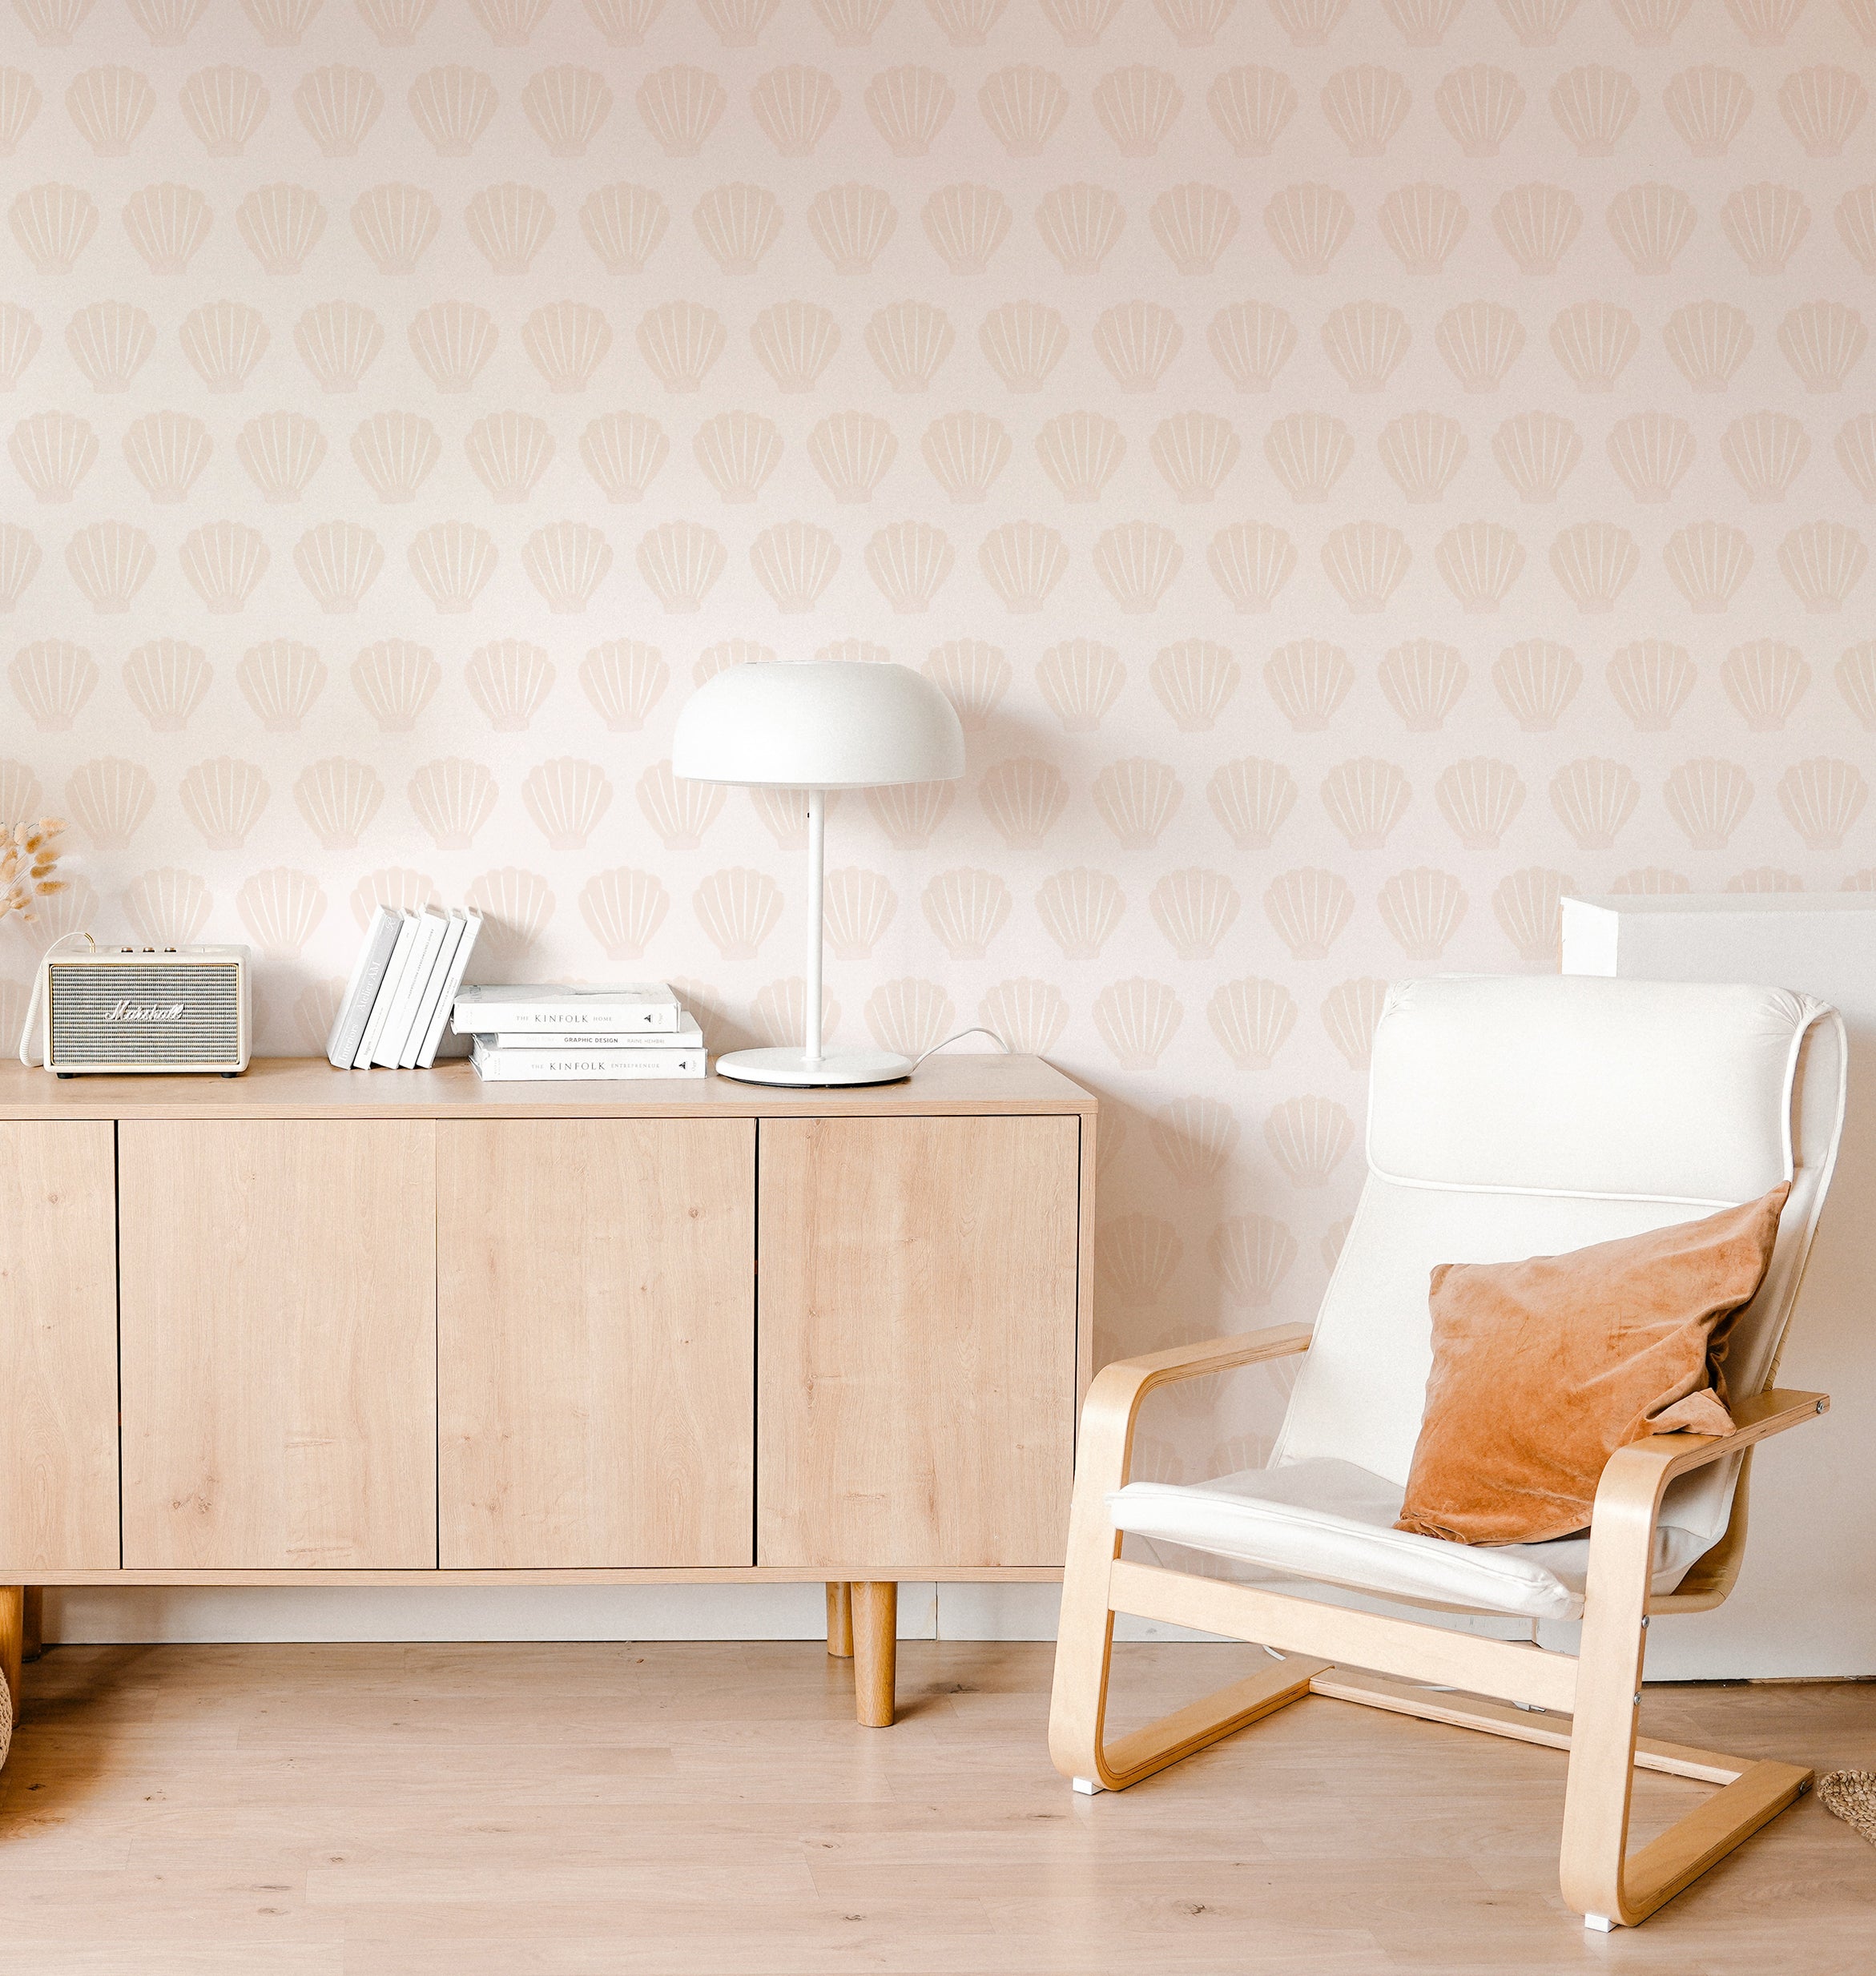 A cozy living room featuring a Scandinavian style decor with Mermaid Sea Shell wallpaper in soft pink, displaying elegant shell patterns. A modern white chair and a wooden cabinet with books and a vintage radio enhance the serene atmosphere.